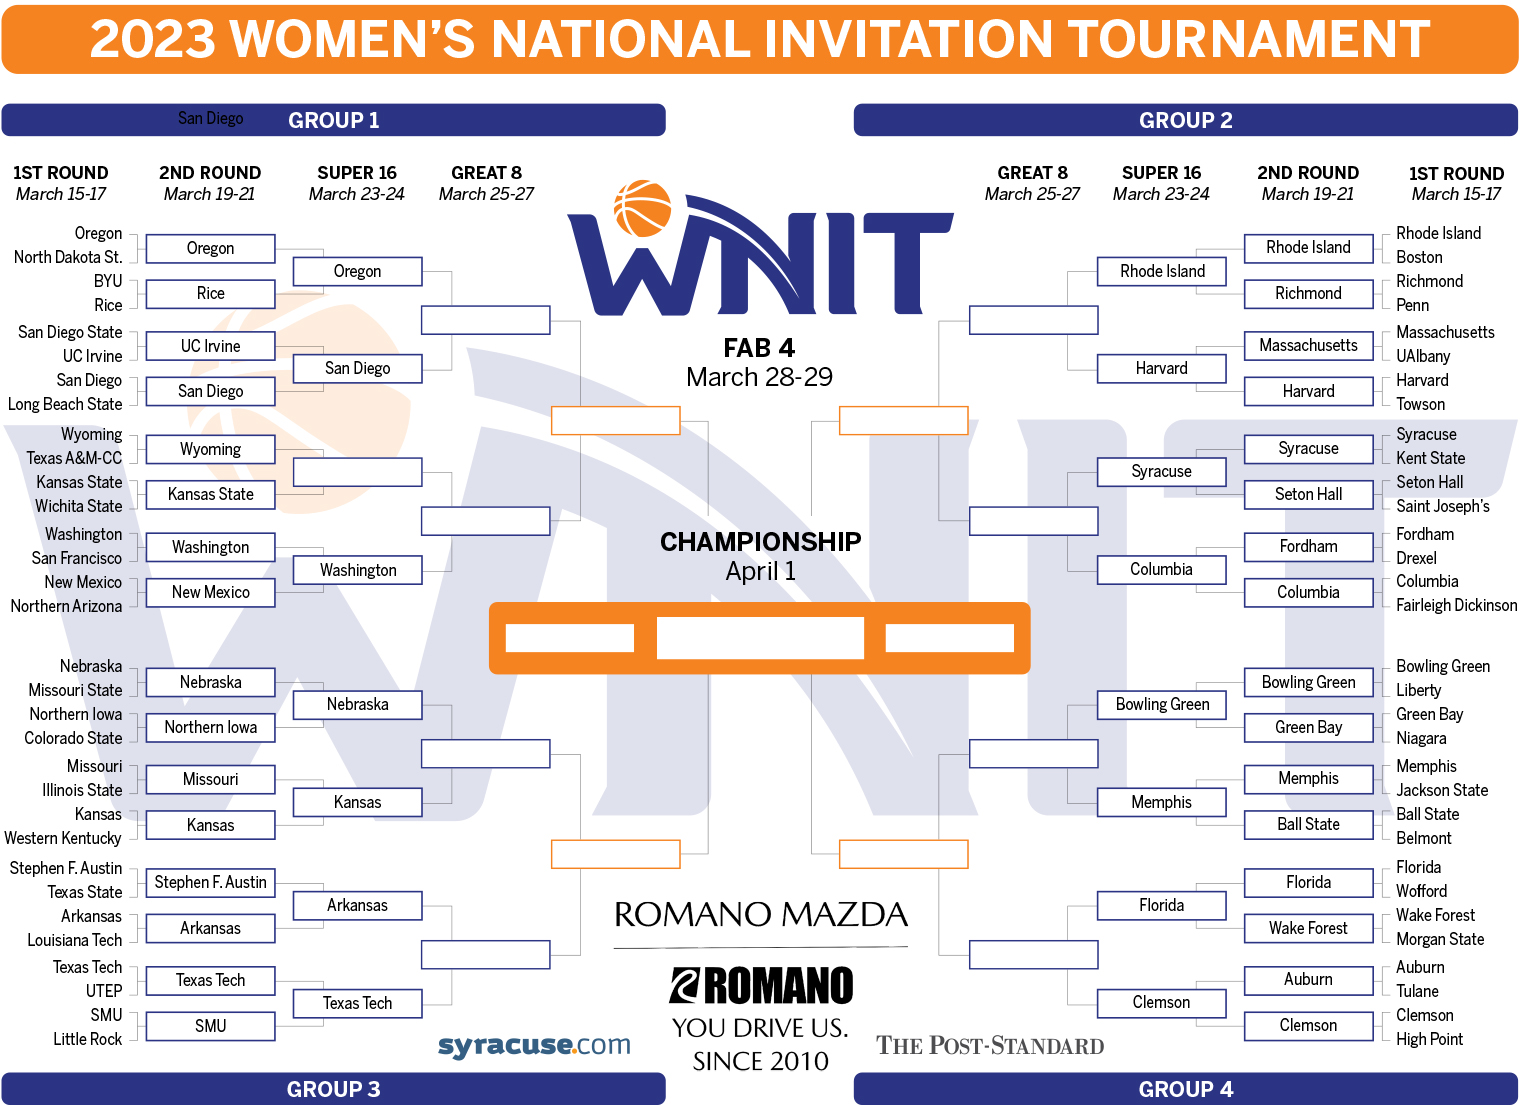 Syracuse women’s basketball in Super 16 of WNIT Next game is Friday